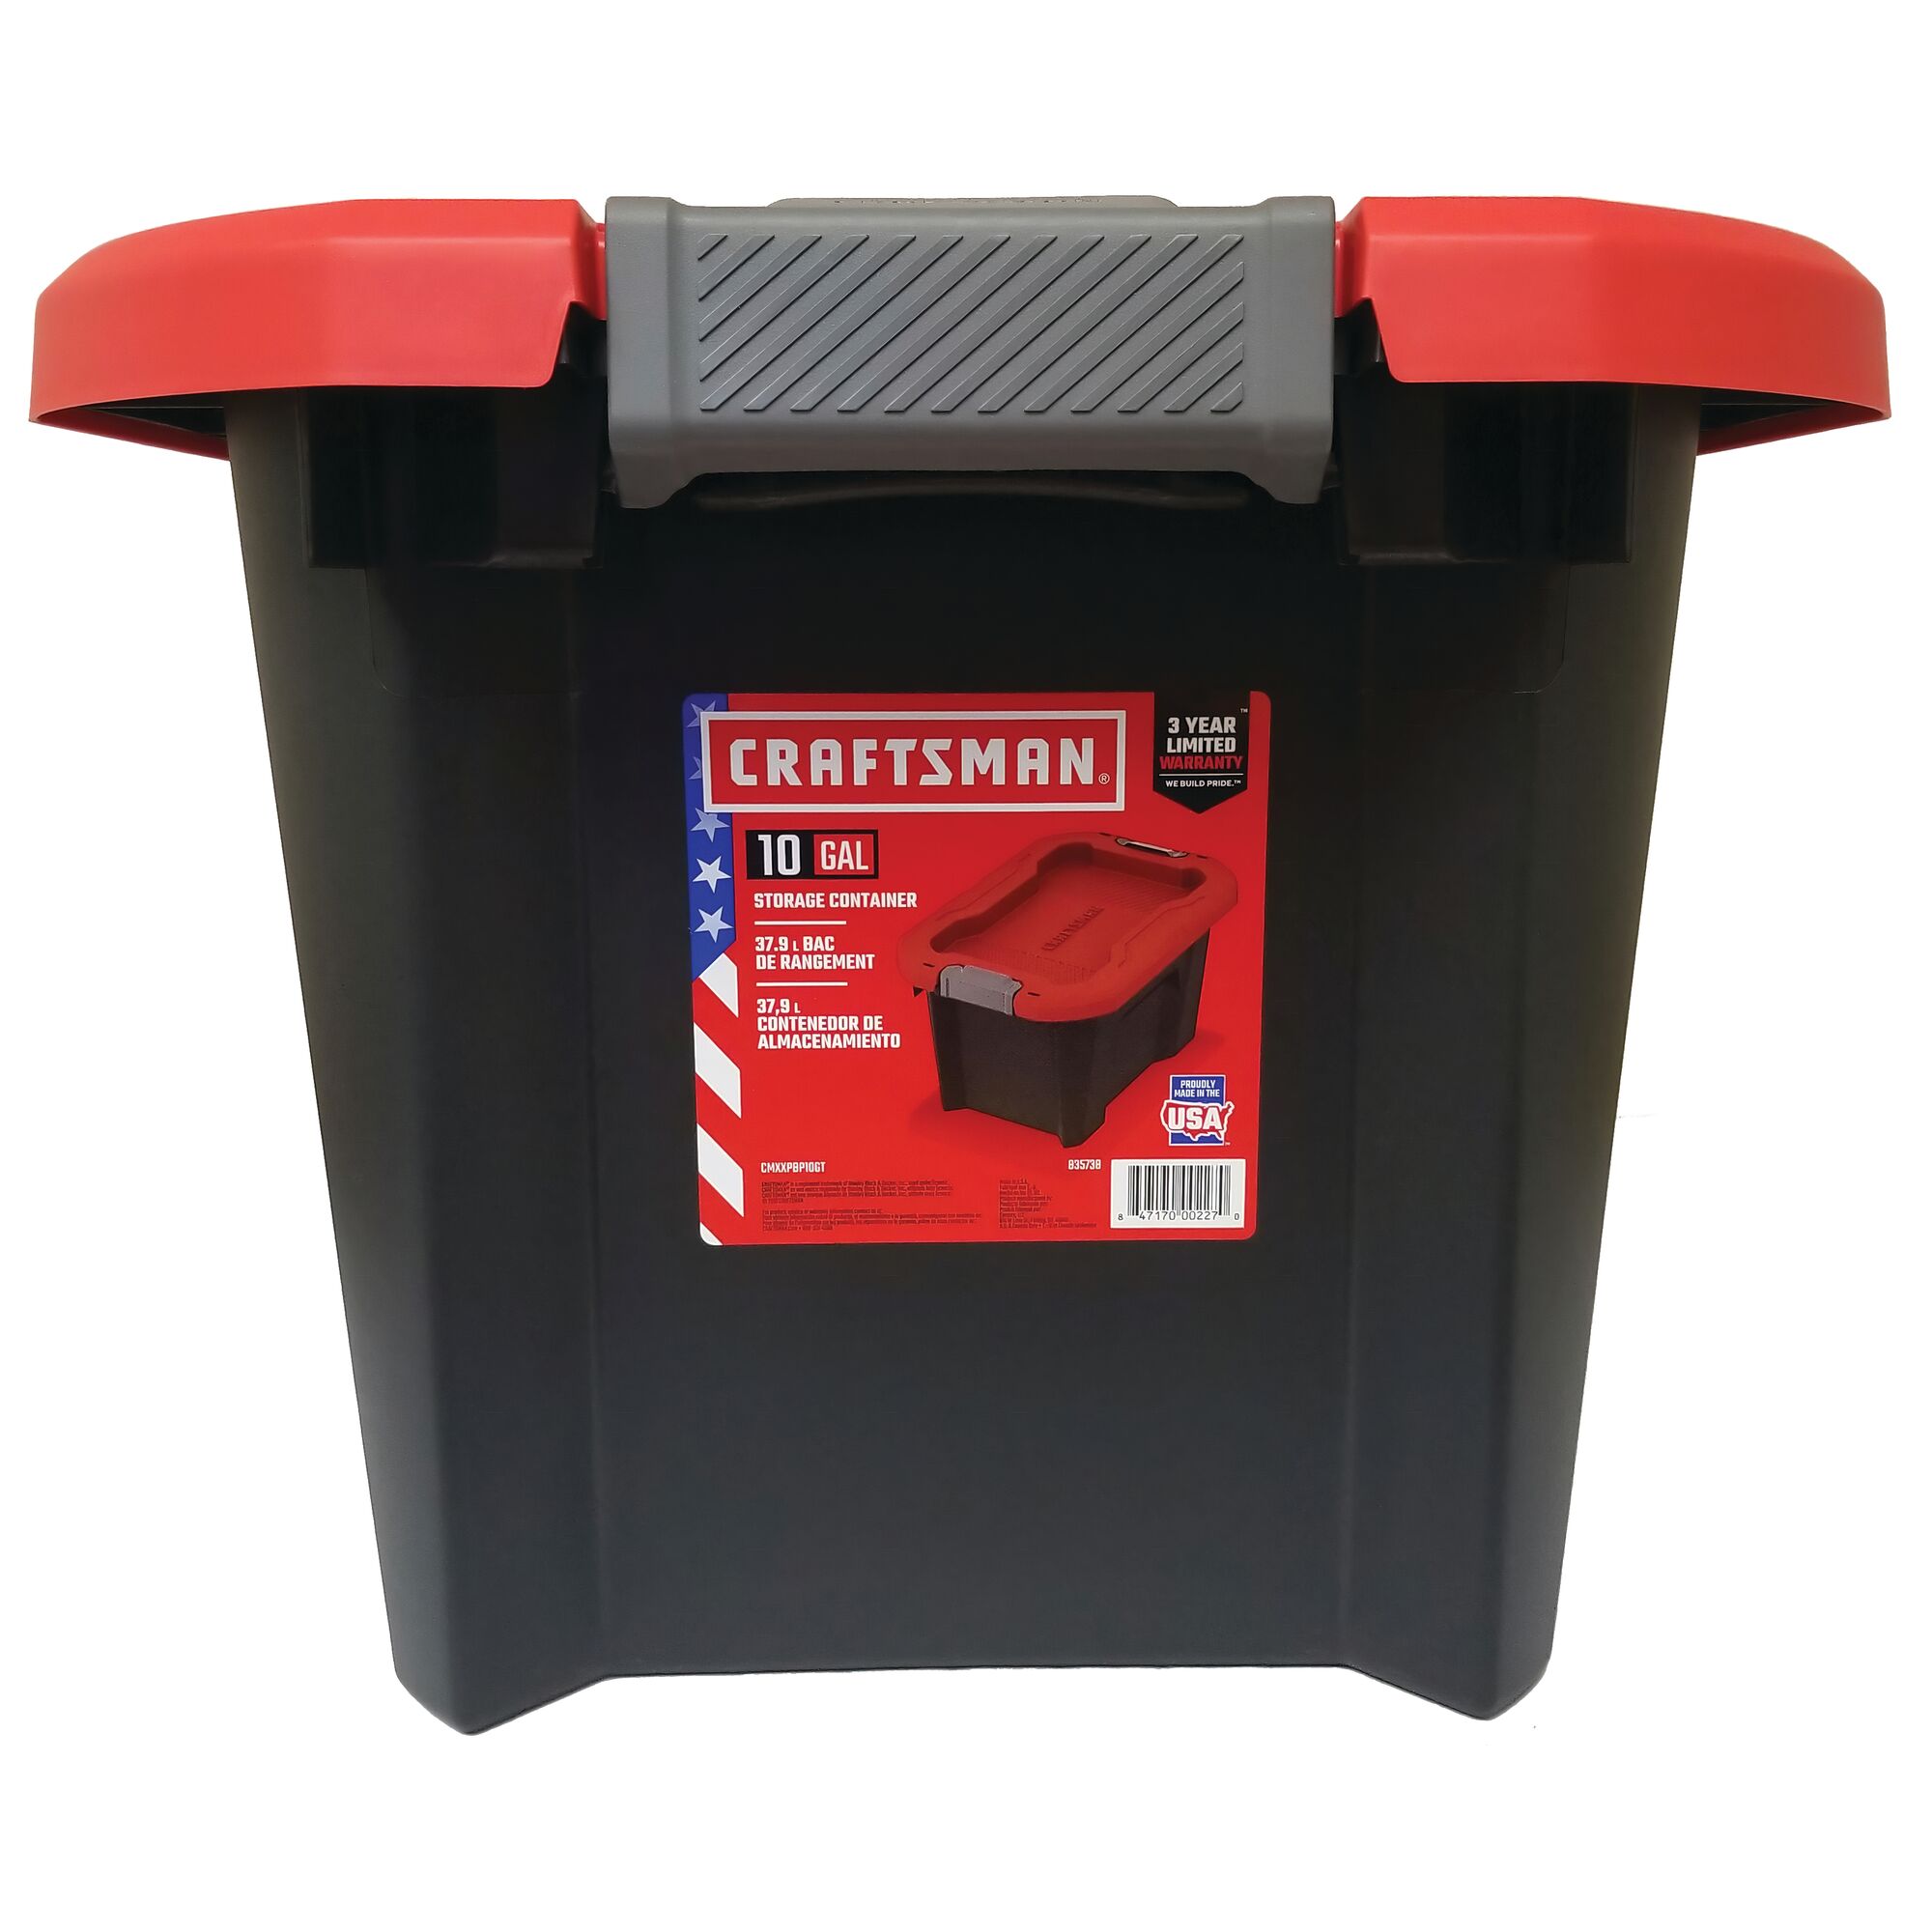 10 Gallon latching tote in packaging.